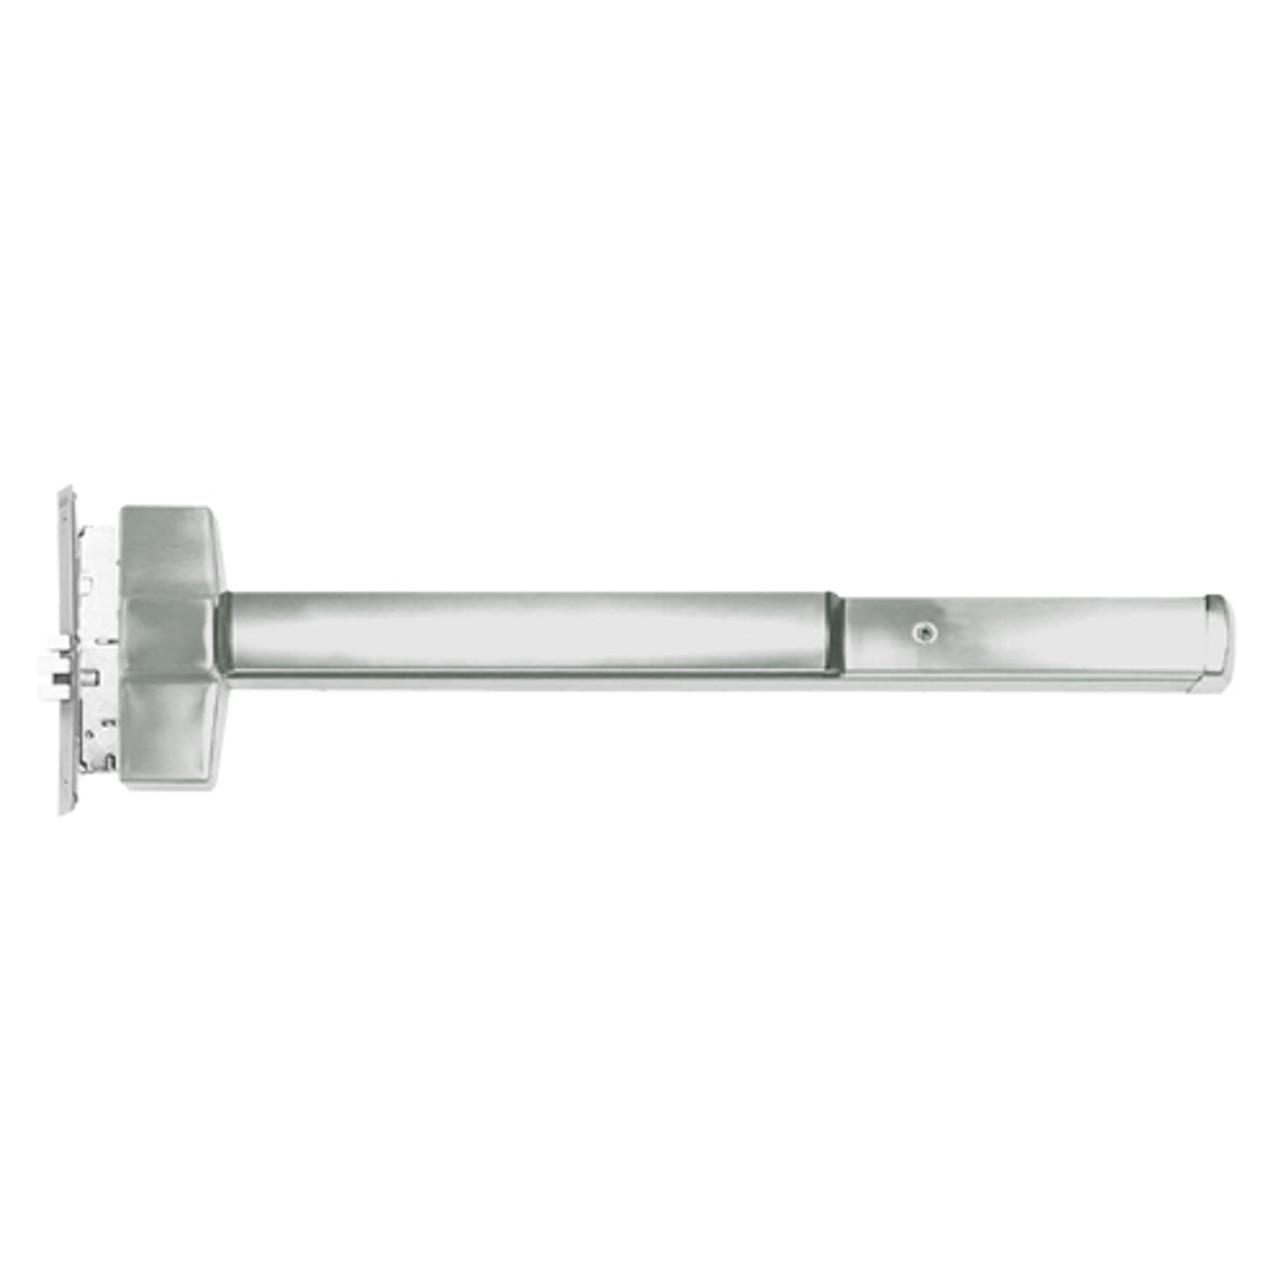 ED5600T-619-W048-LHR Corbin ED5600 Series Non Fire Rated Mortise Exit Device in Satin Nickel Finish